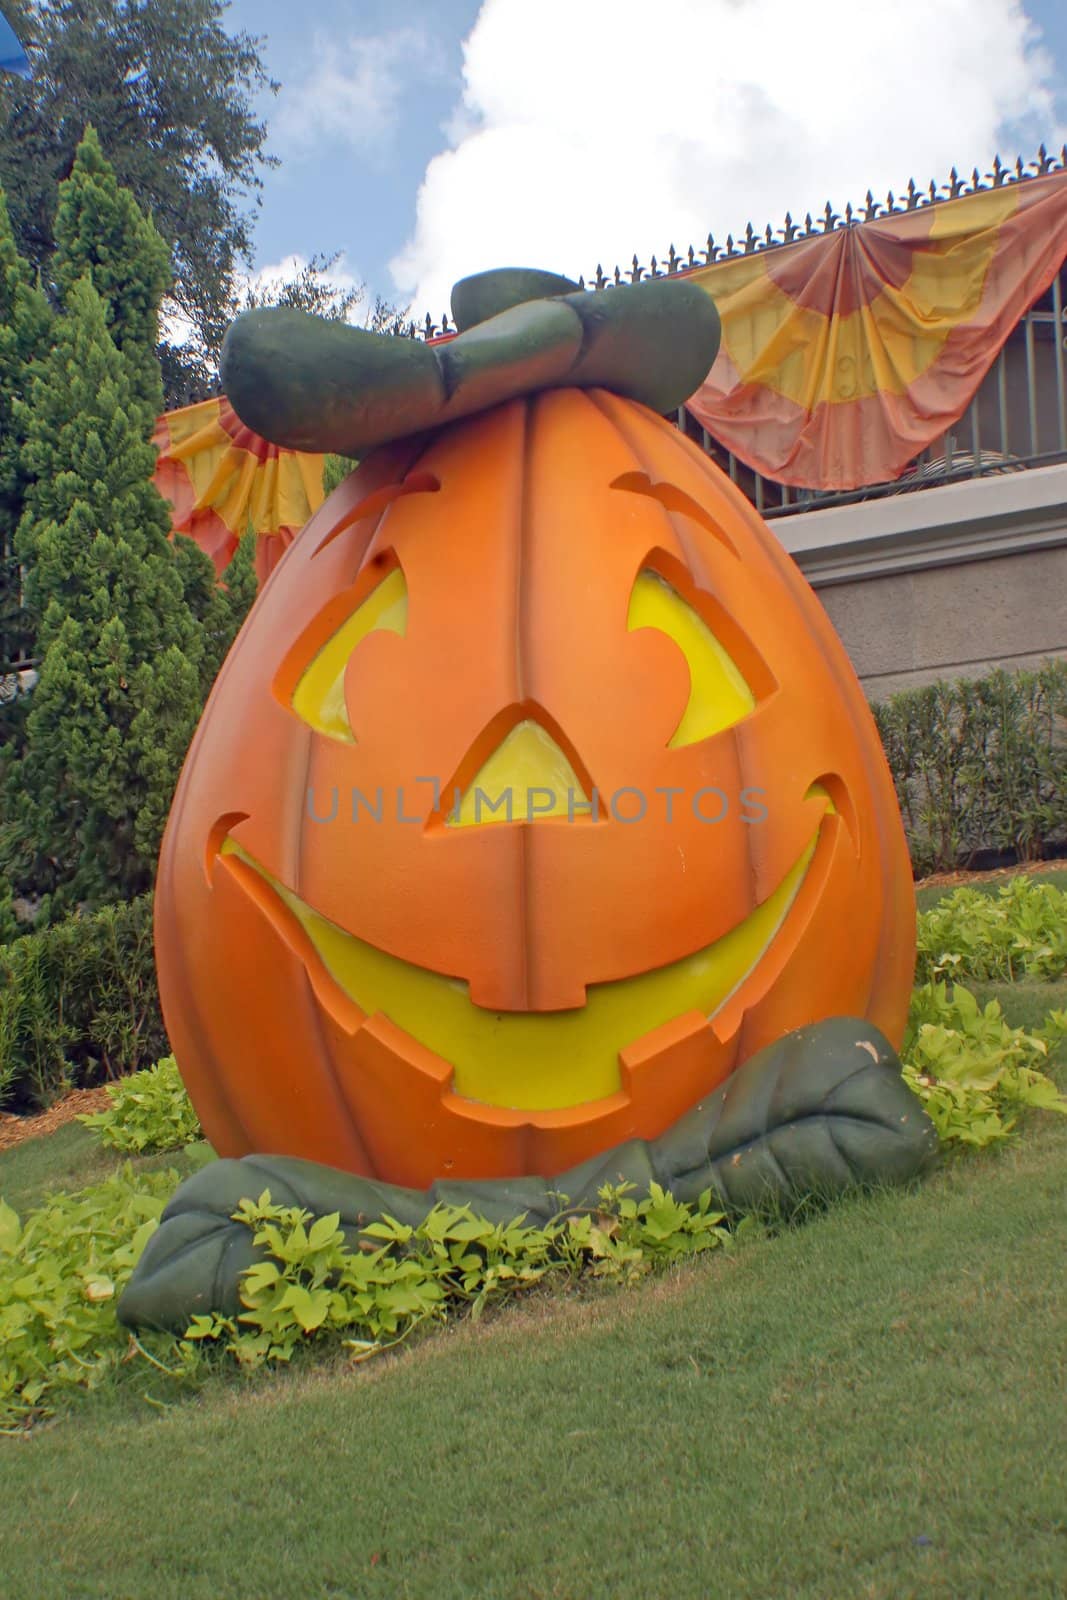 A big pumpkin with a happy smiling face